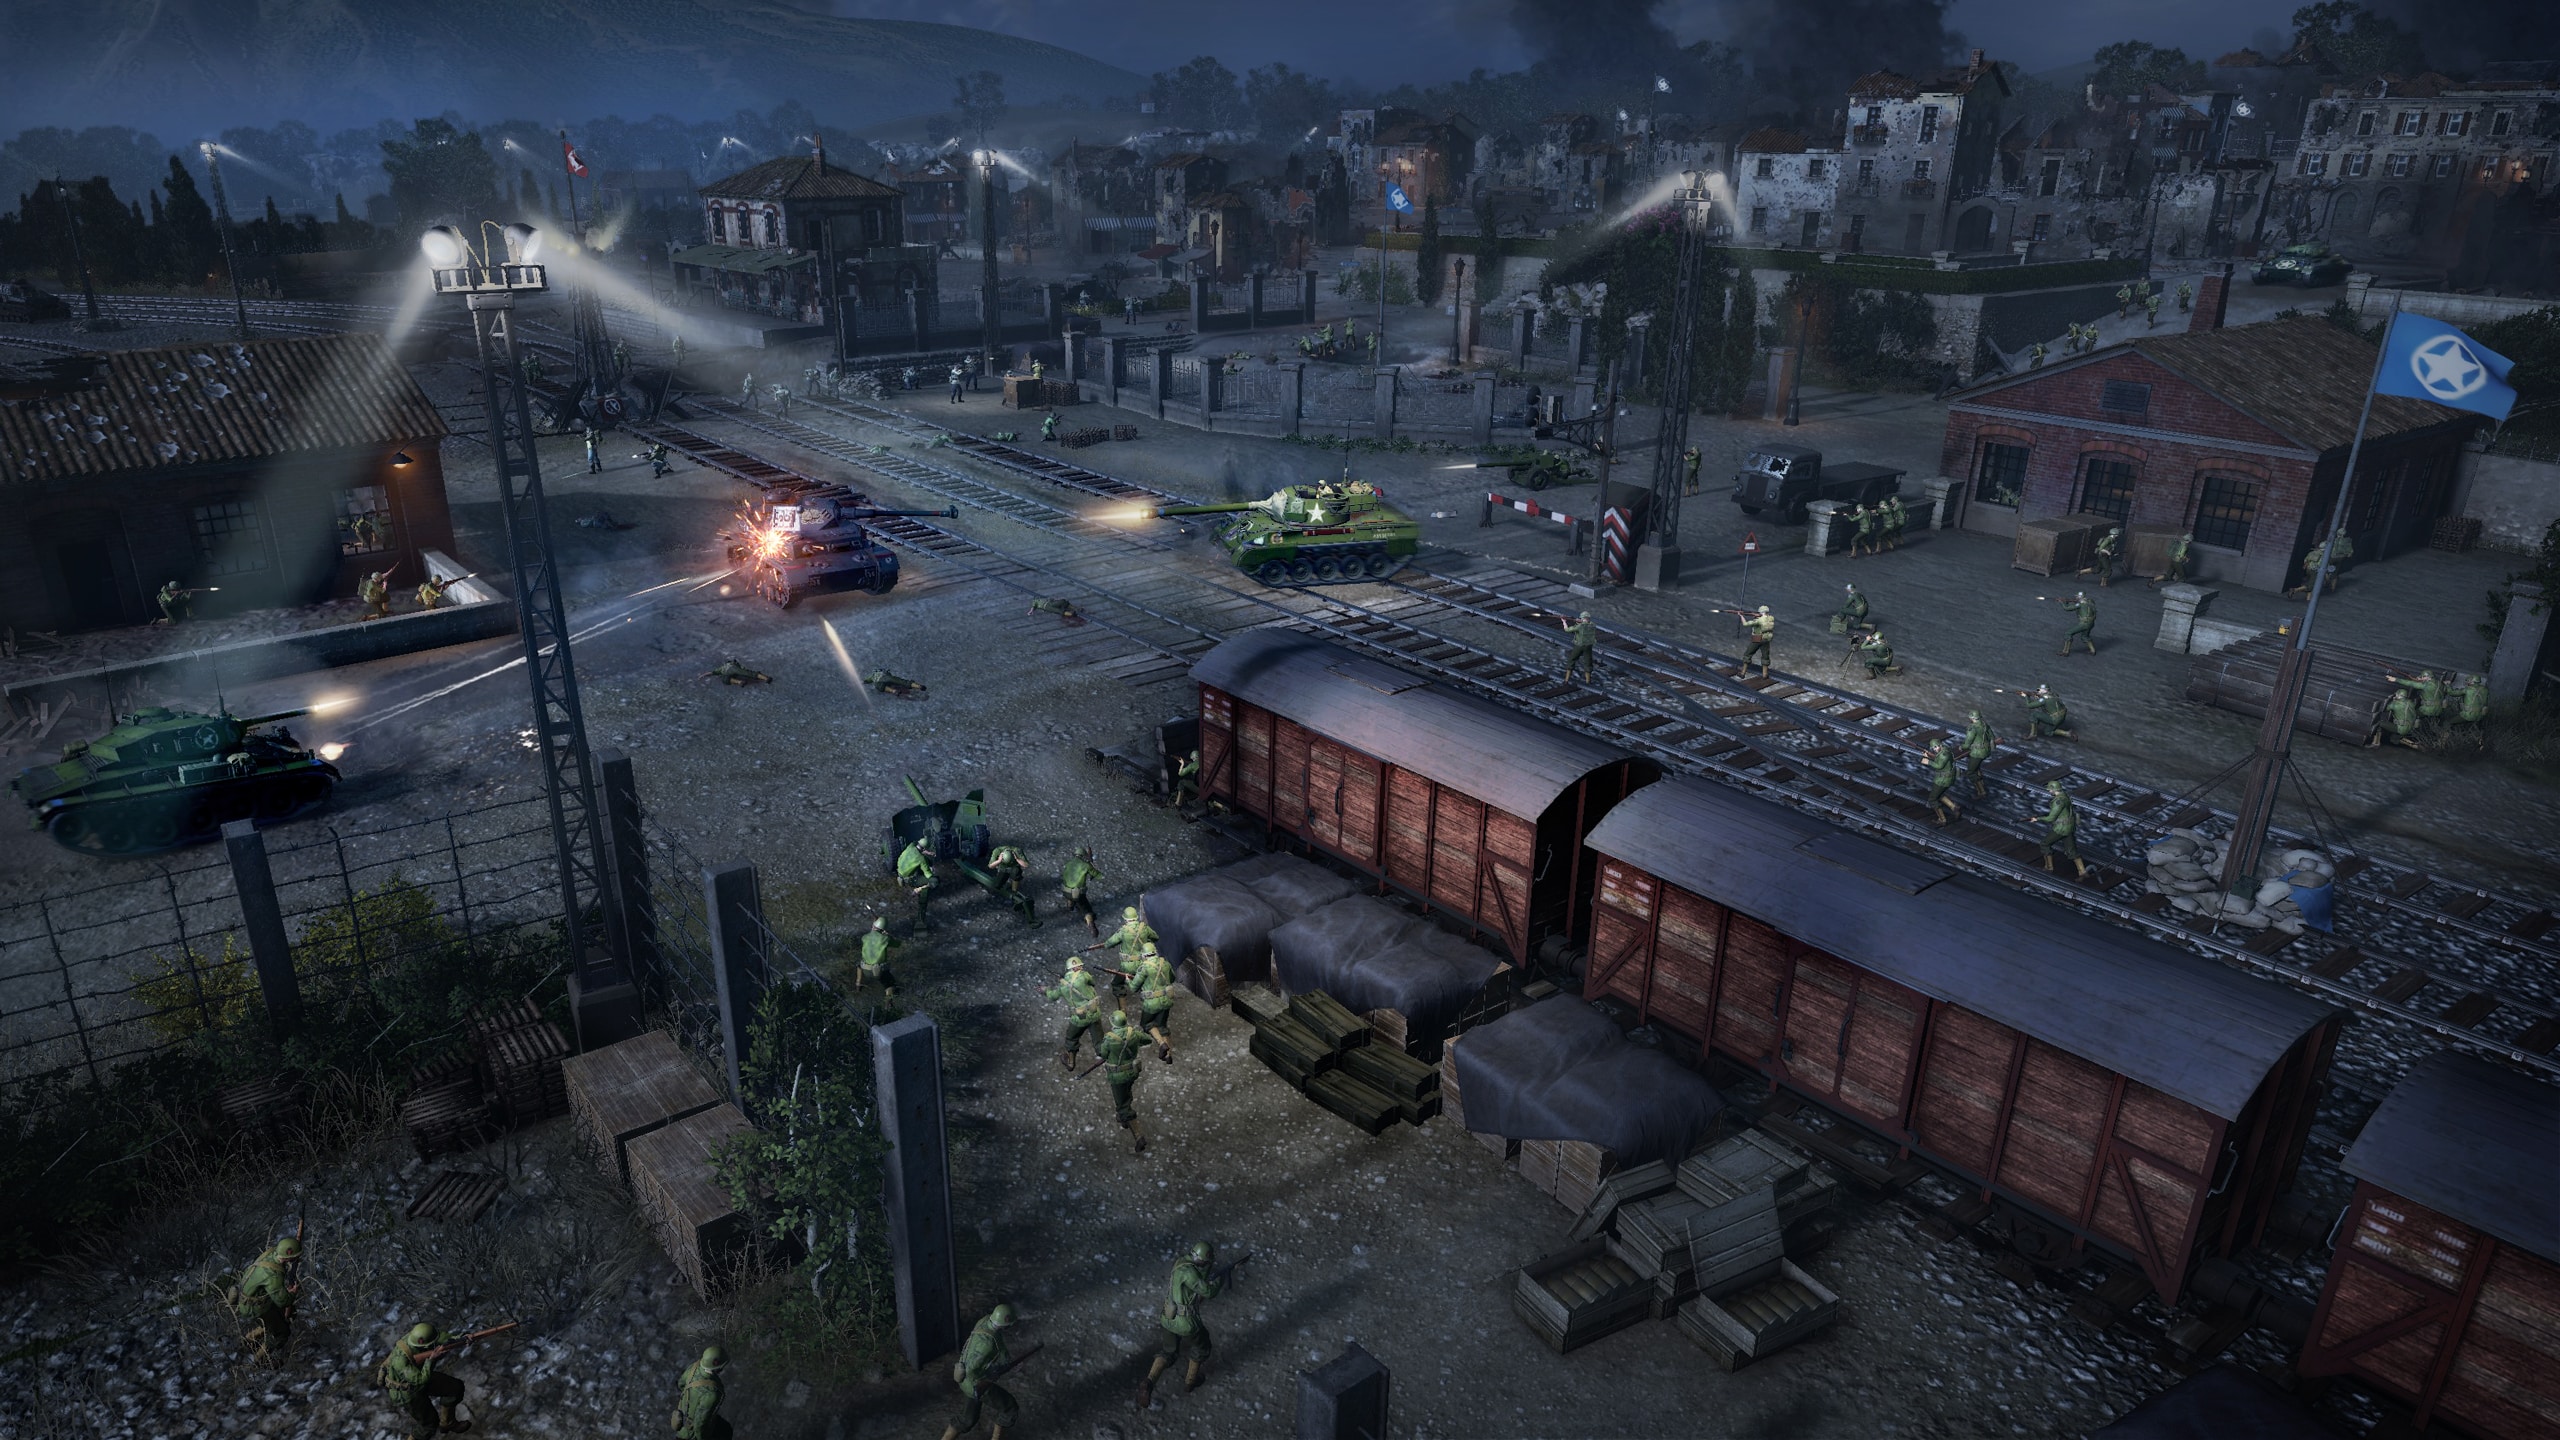 Company of Heroes 3 Hands On - Impresiones GamersRD 15456